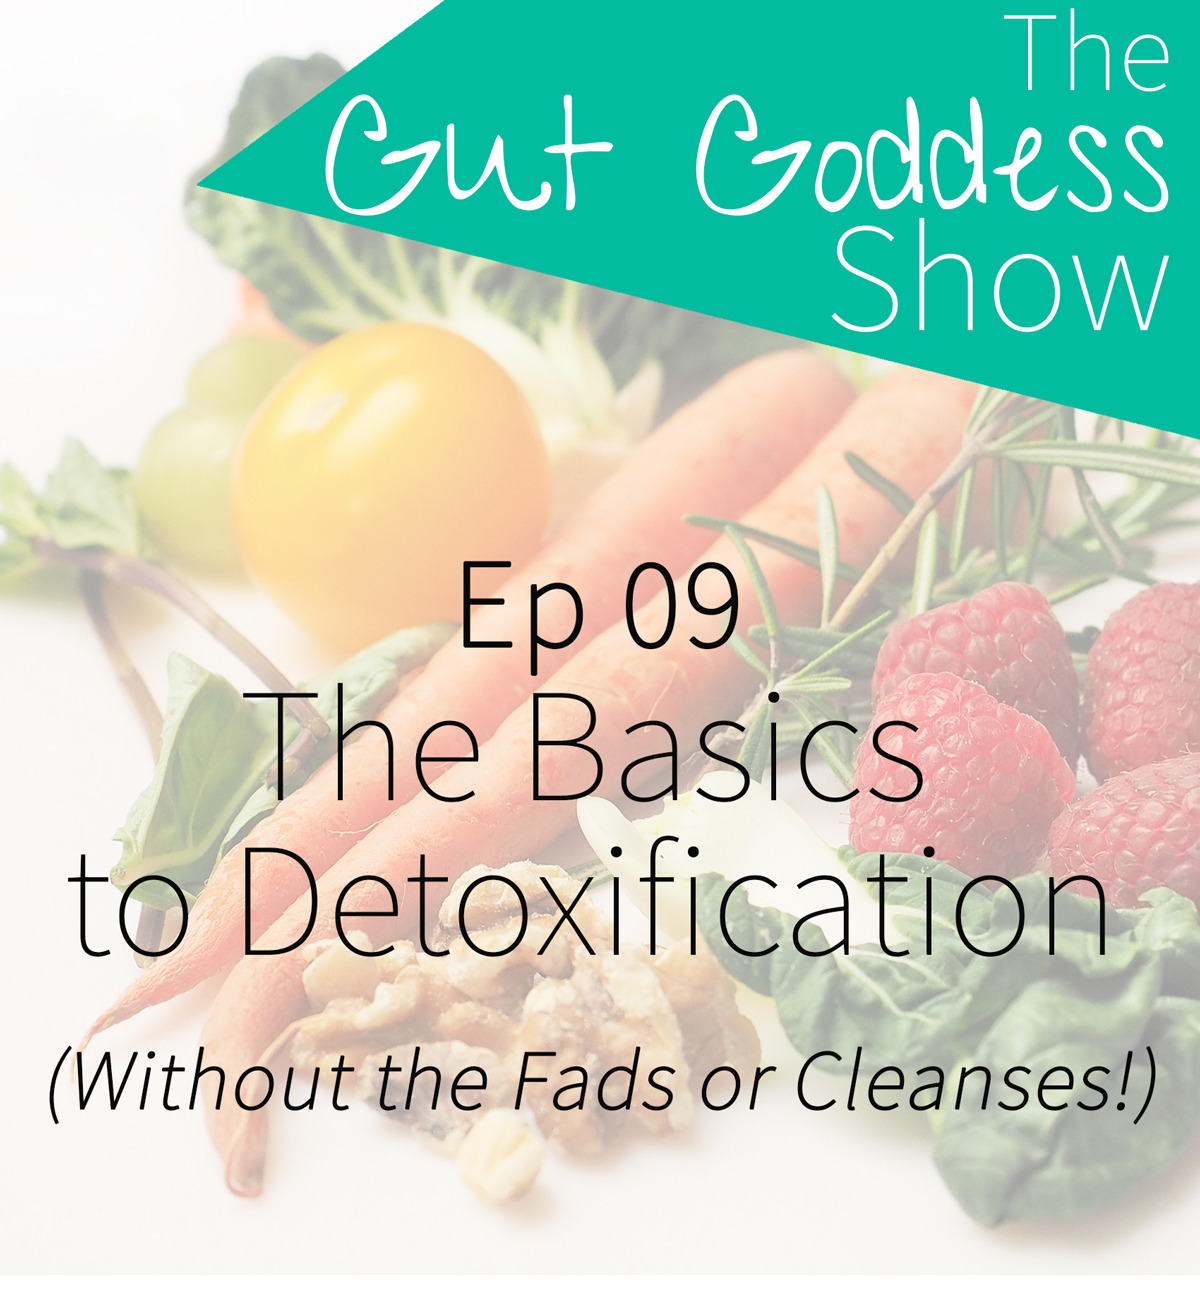 Ep 09: The Basics of Detoxification (Without the Fads or Cleanses!)